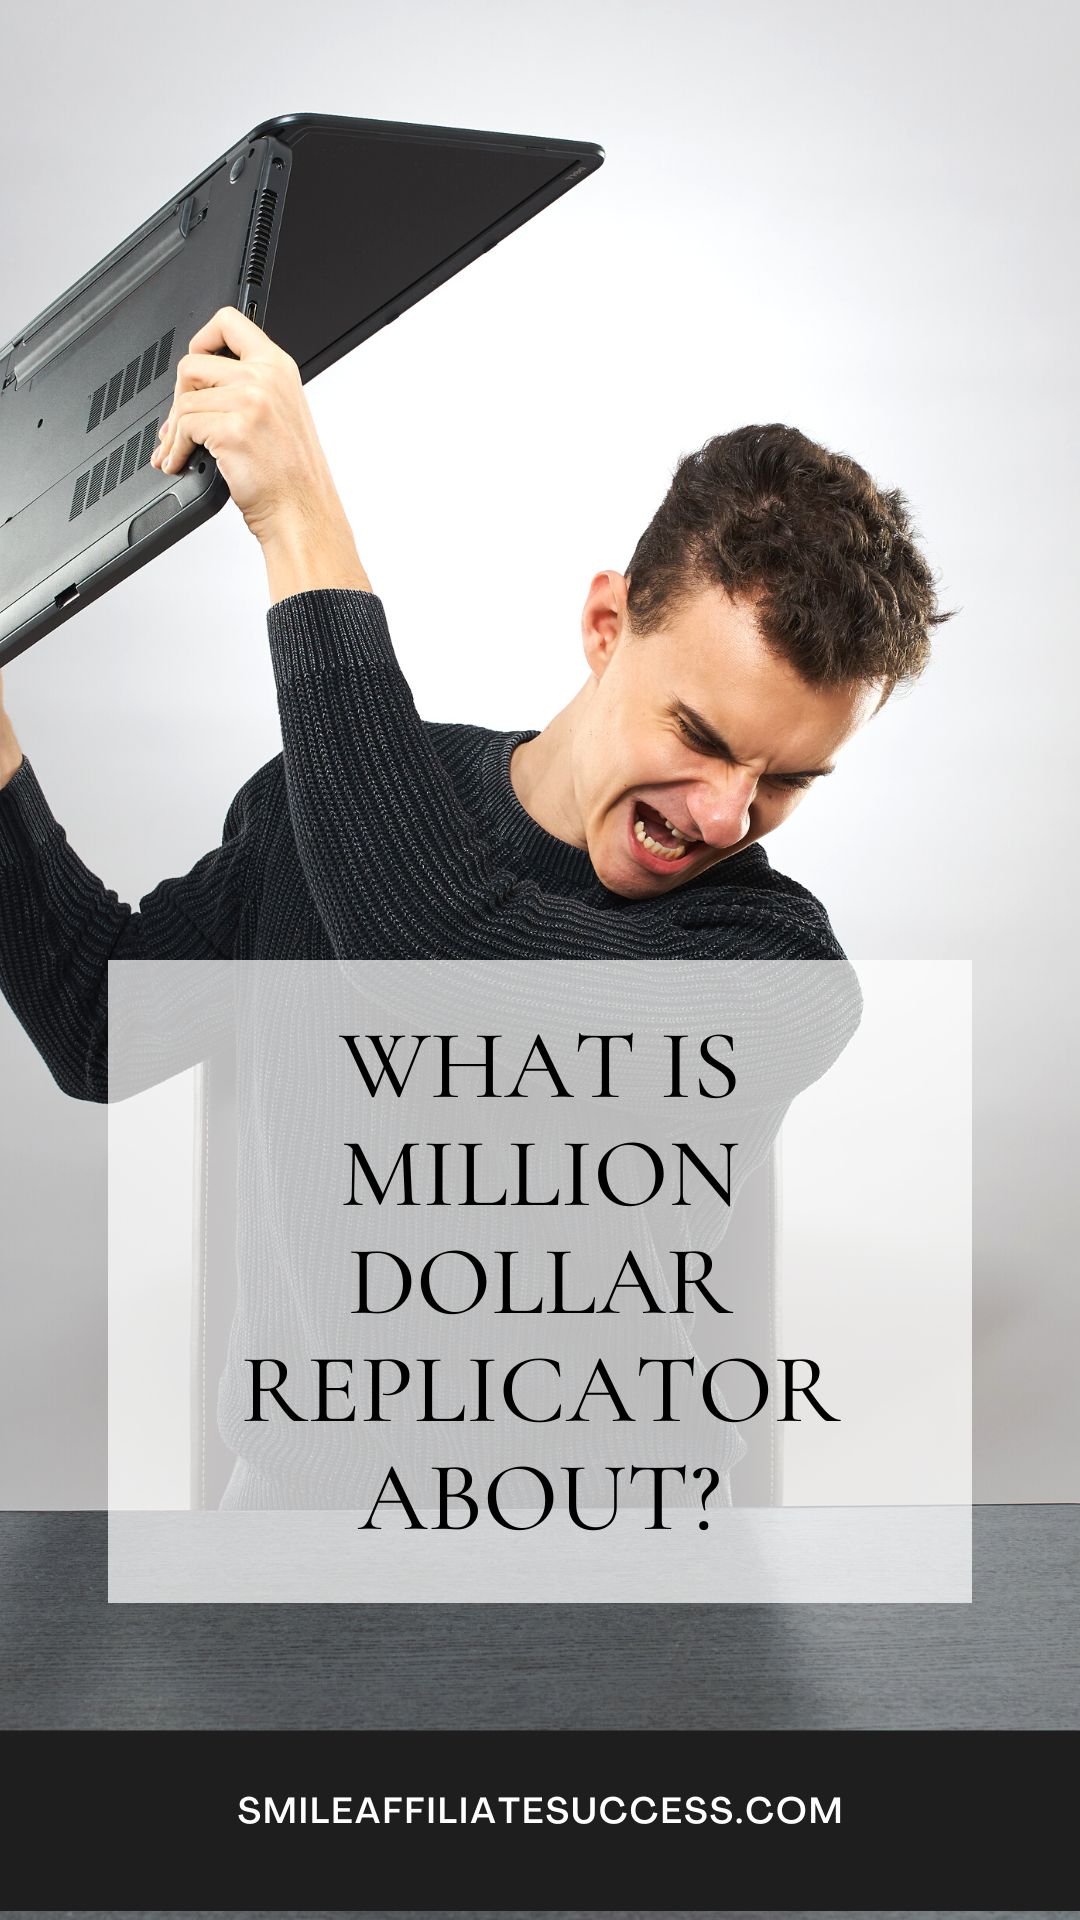 What Is Million Dollar Replicator About?